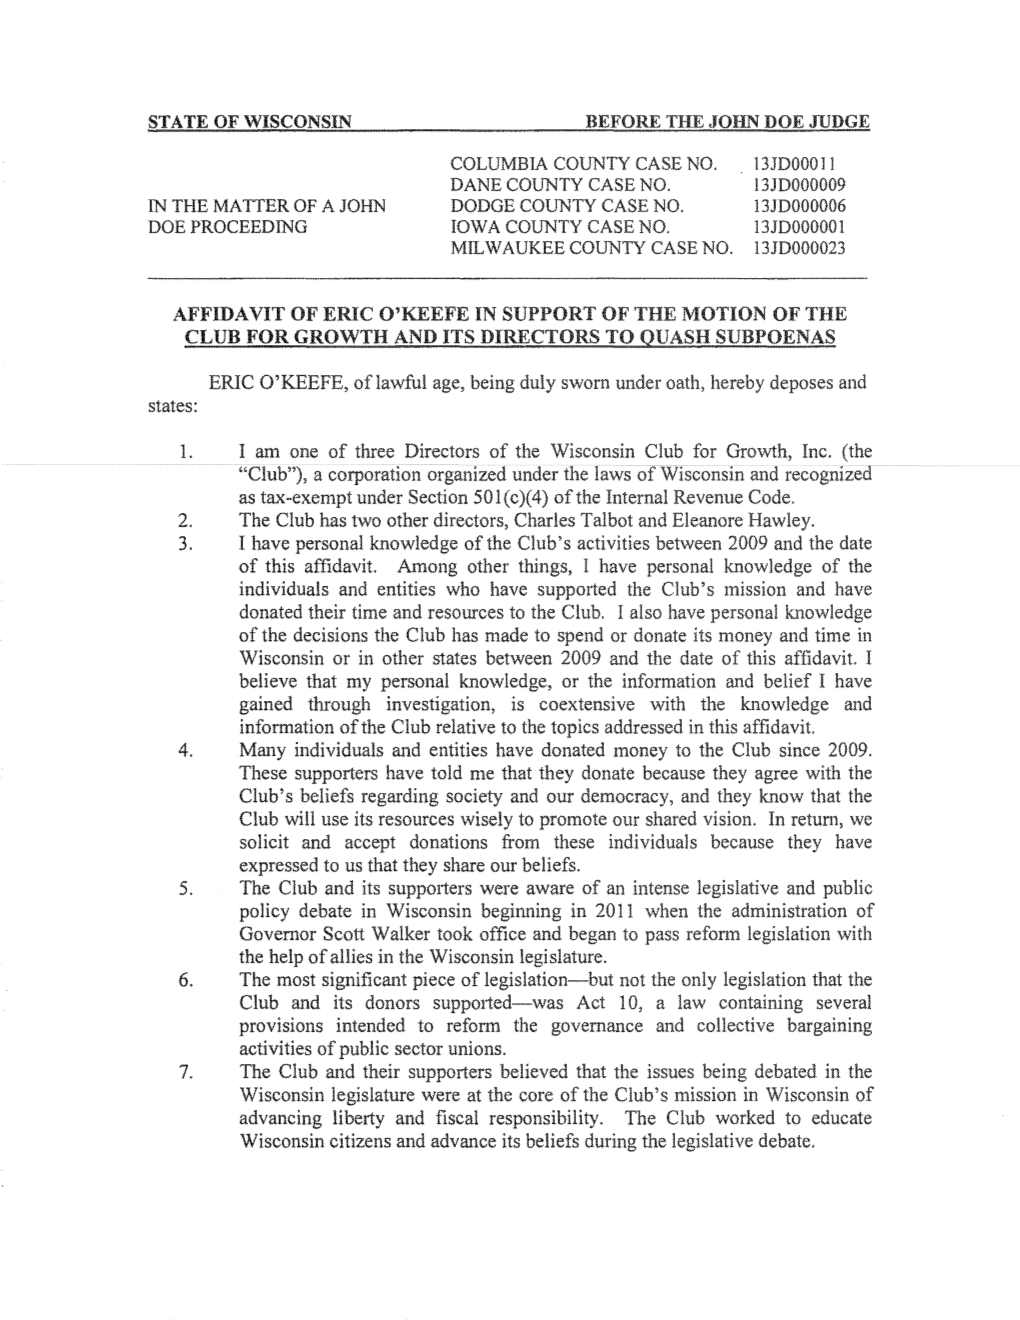 Affidavit of Eric O'keefe in Support of the Motion of Tiie Club for Growtii and Its Directors to Quash Subpoenas